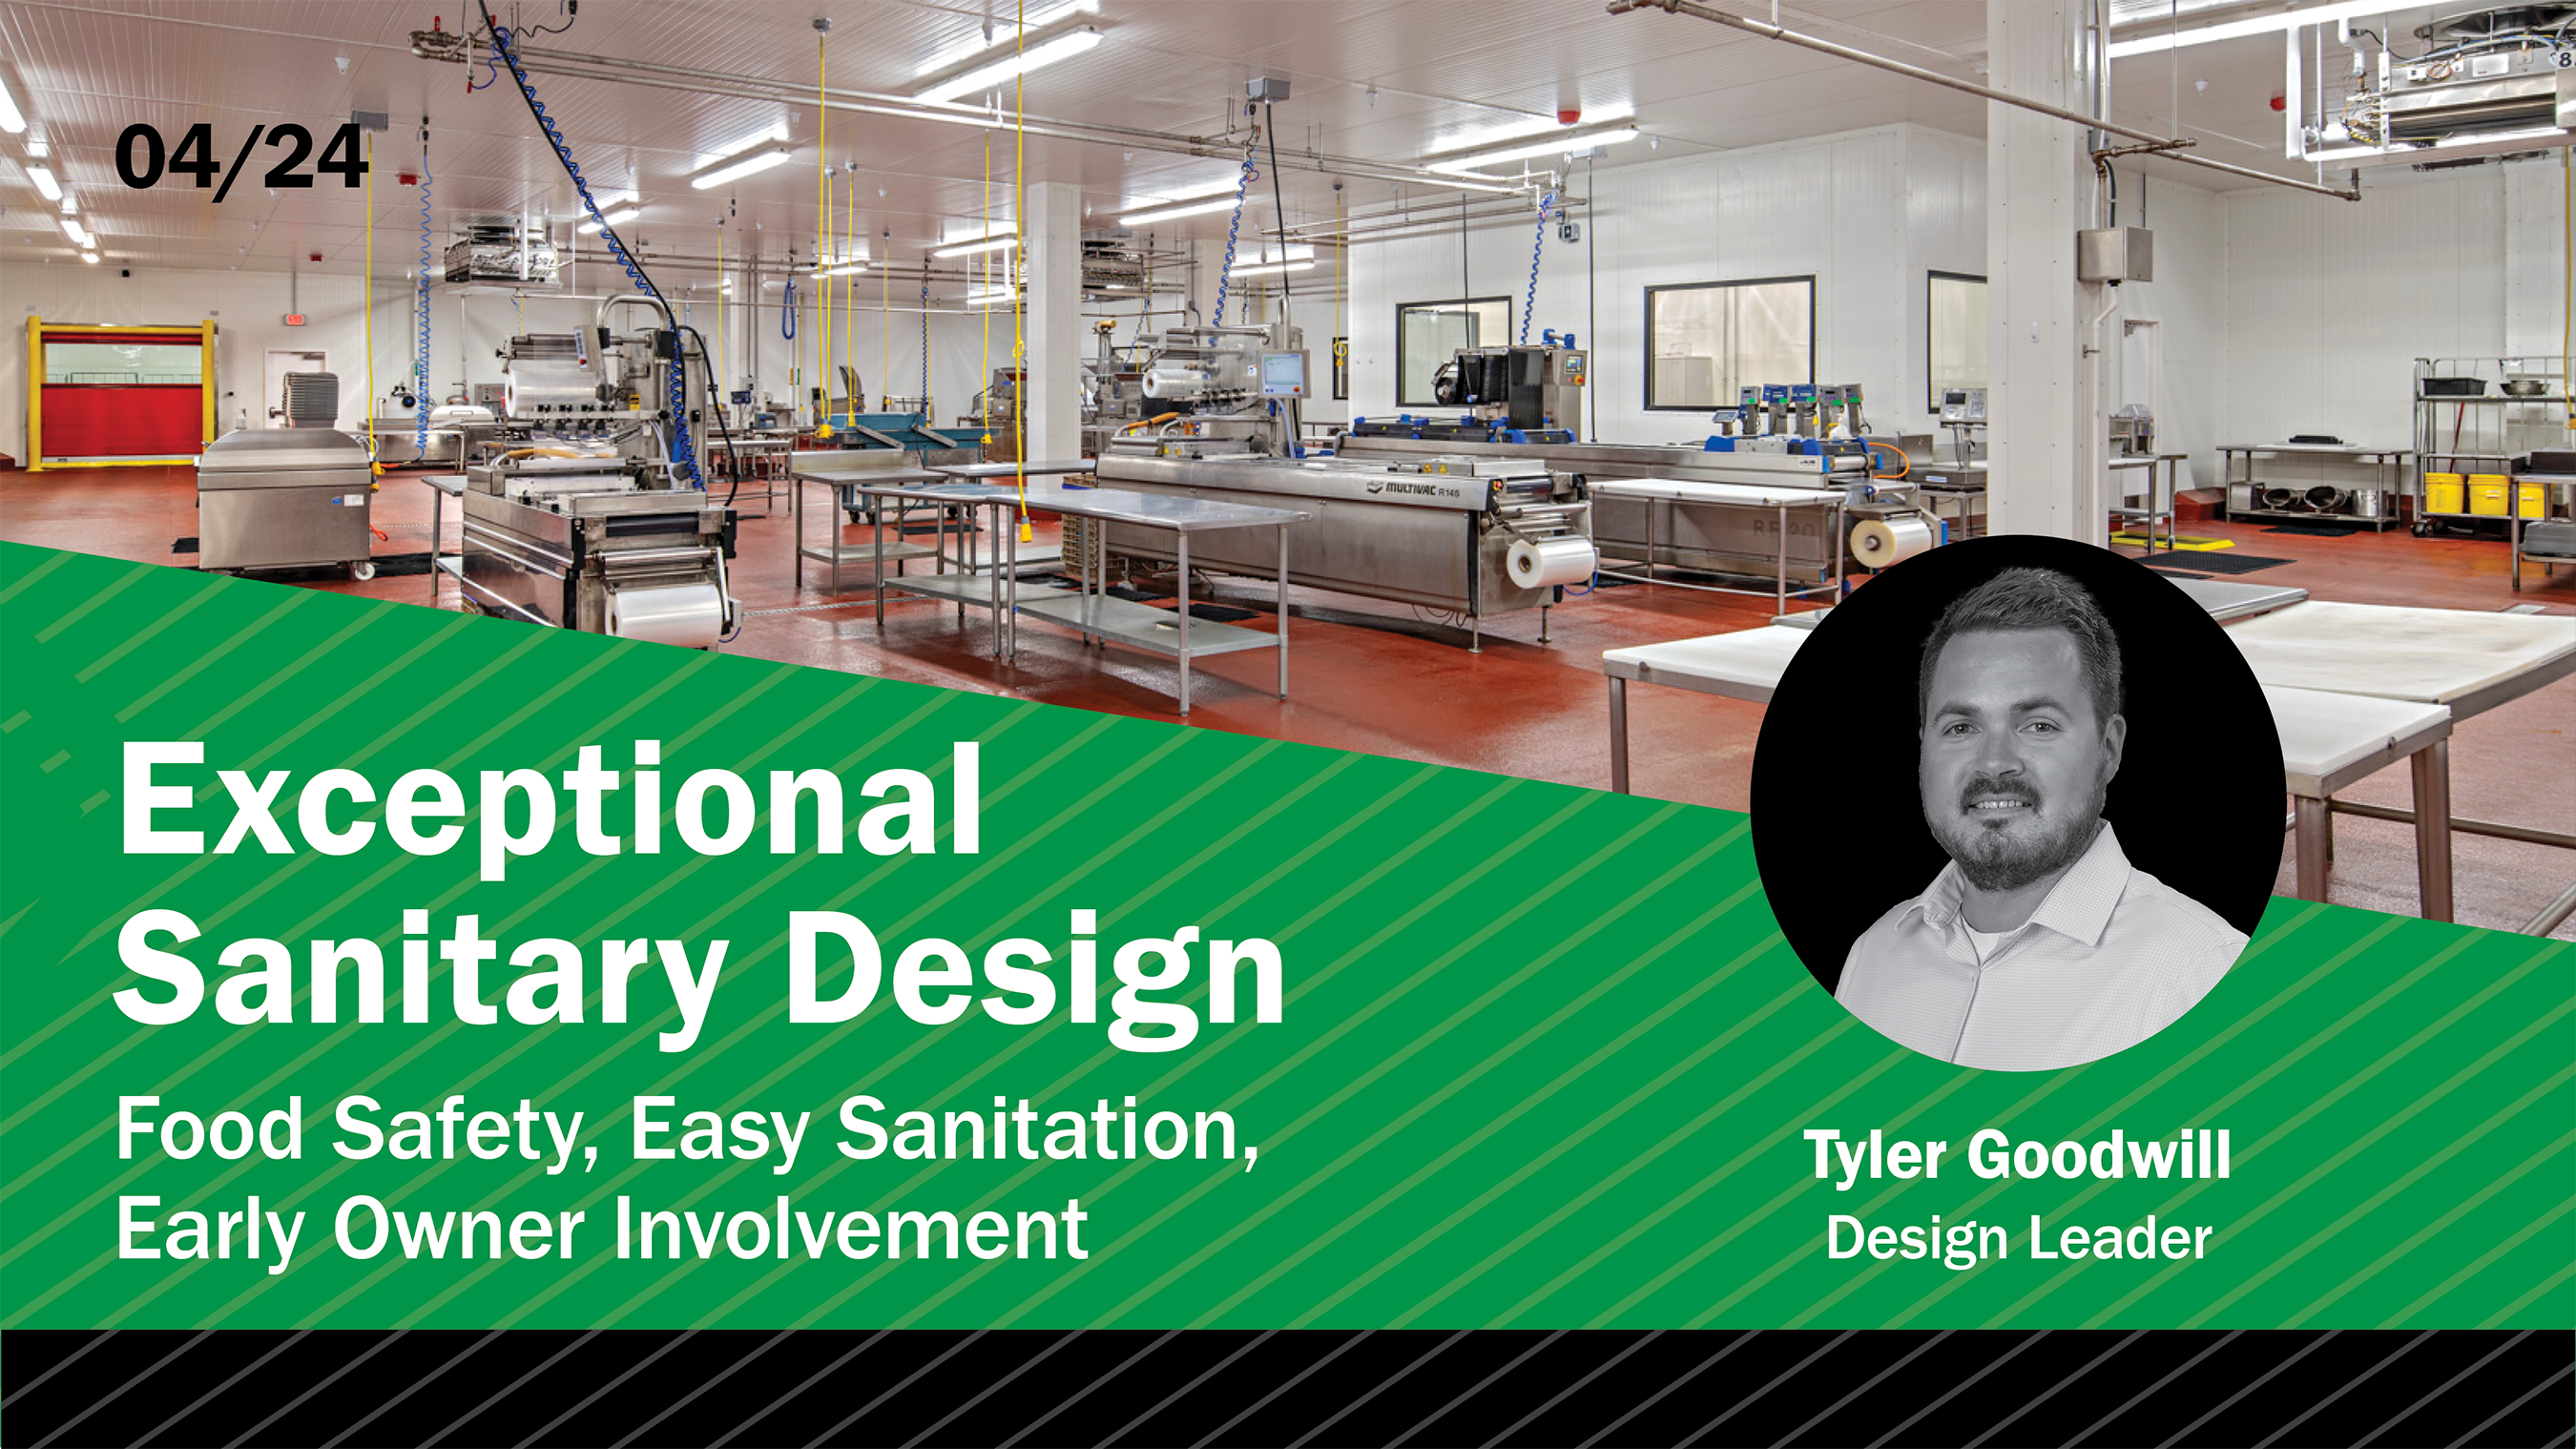 The Secret to Exceptional Sanitary Design